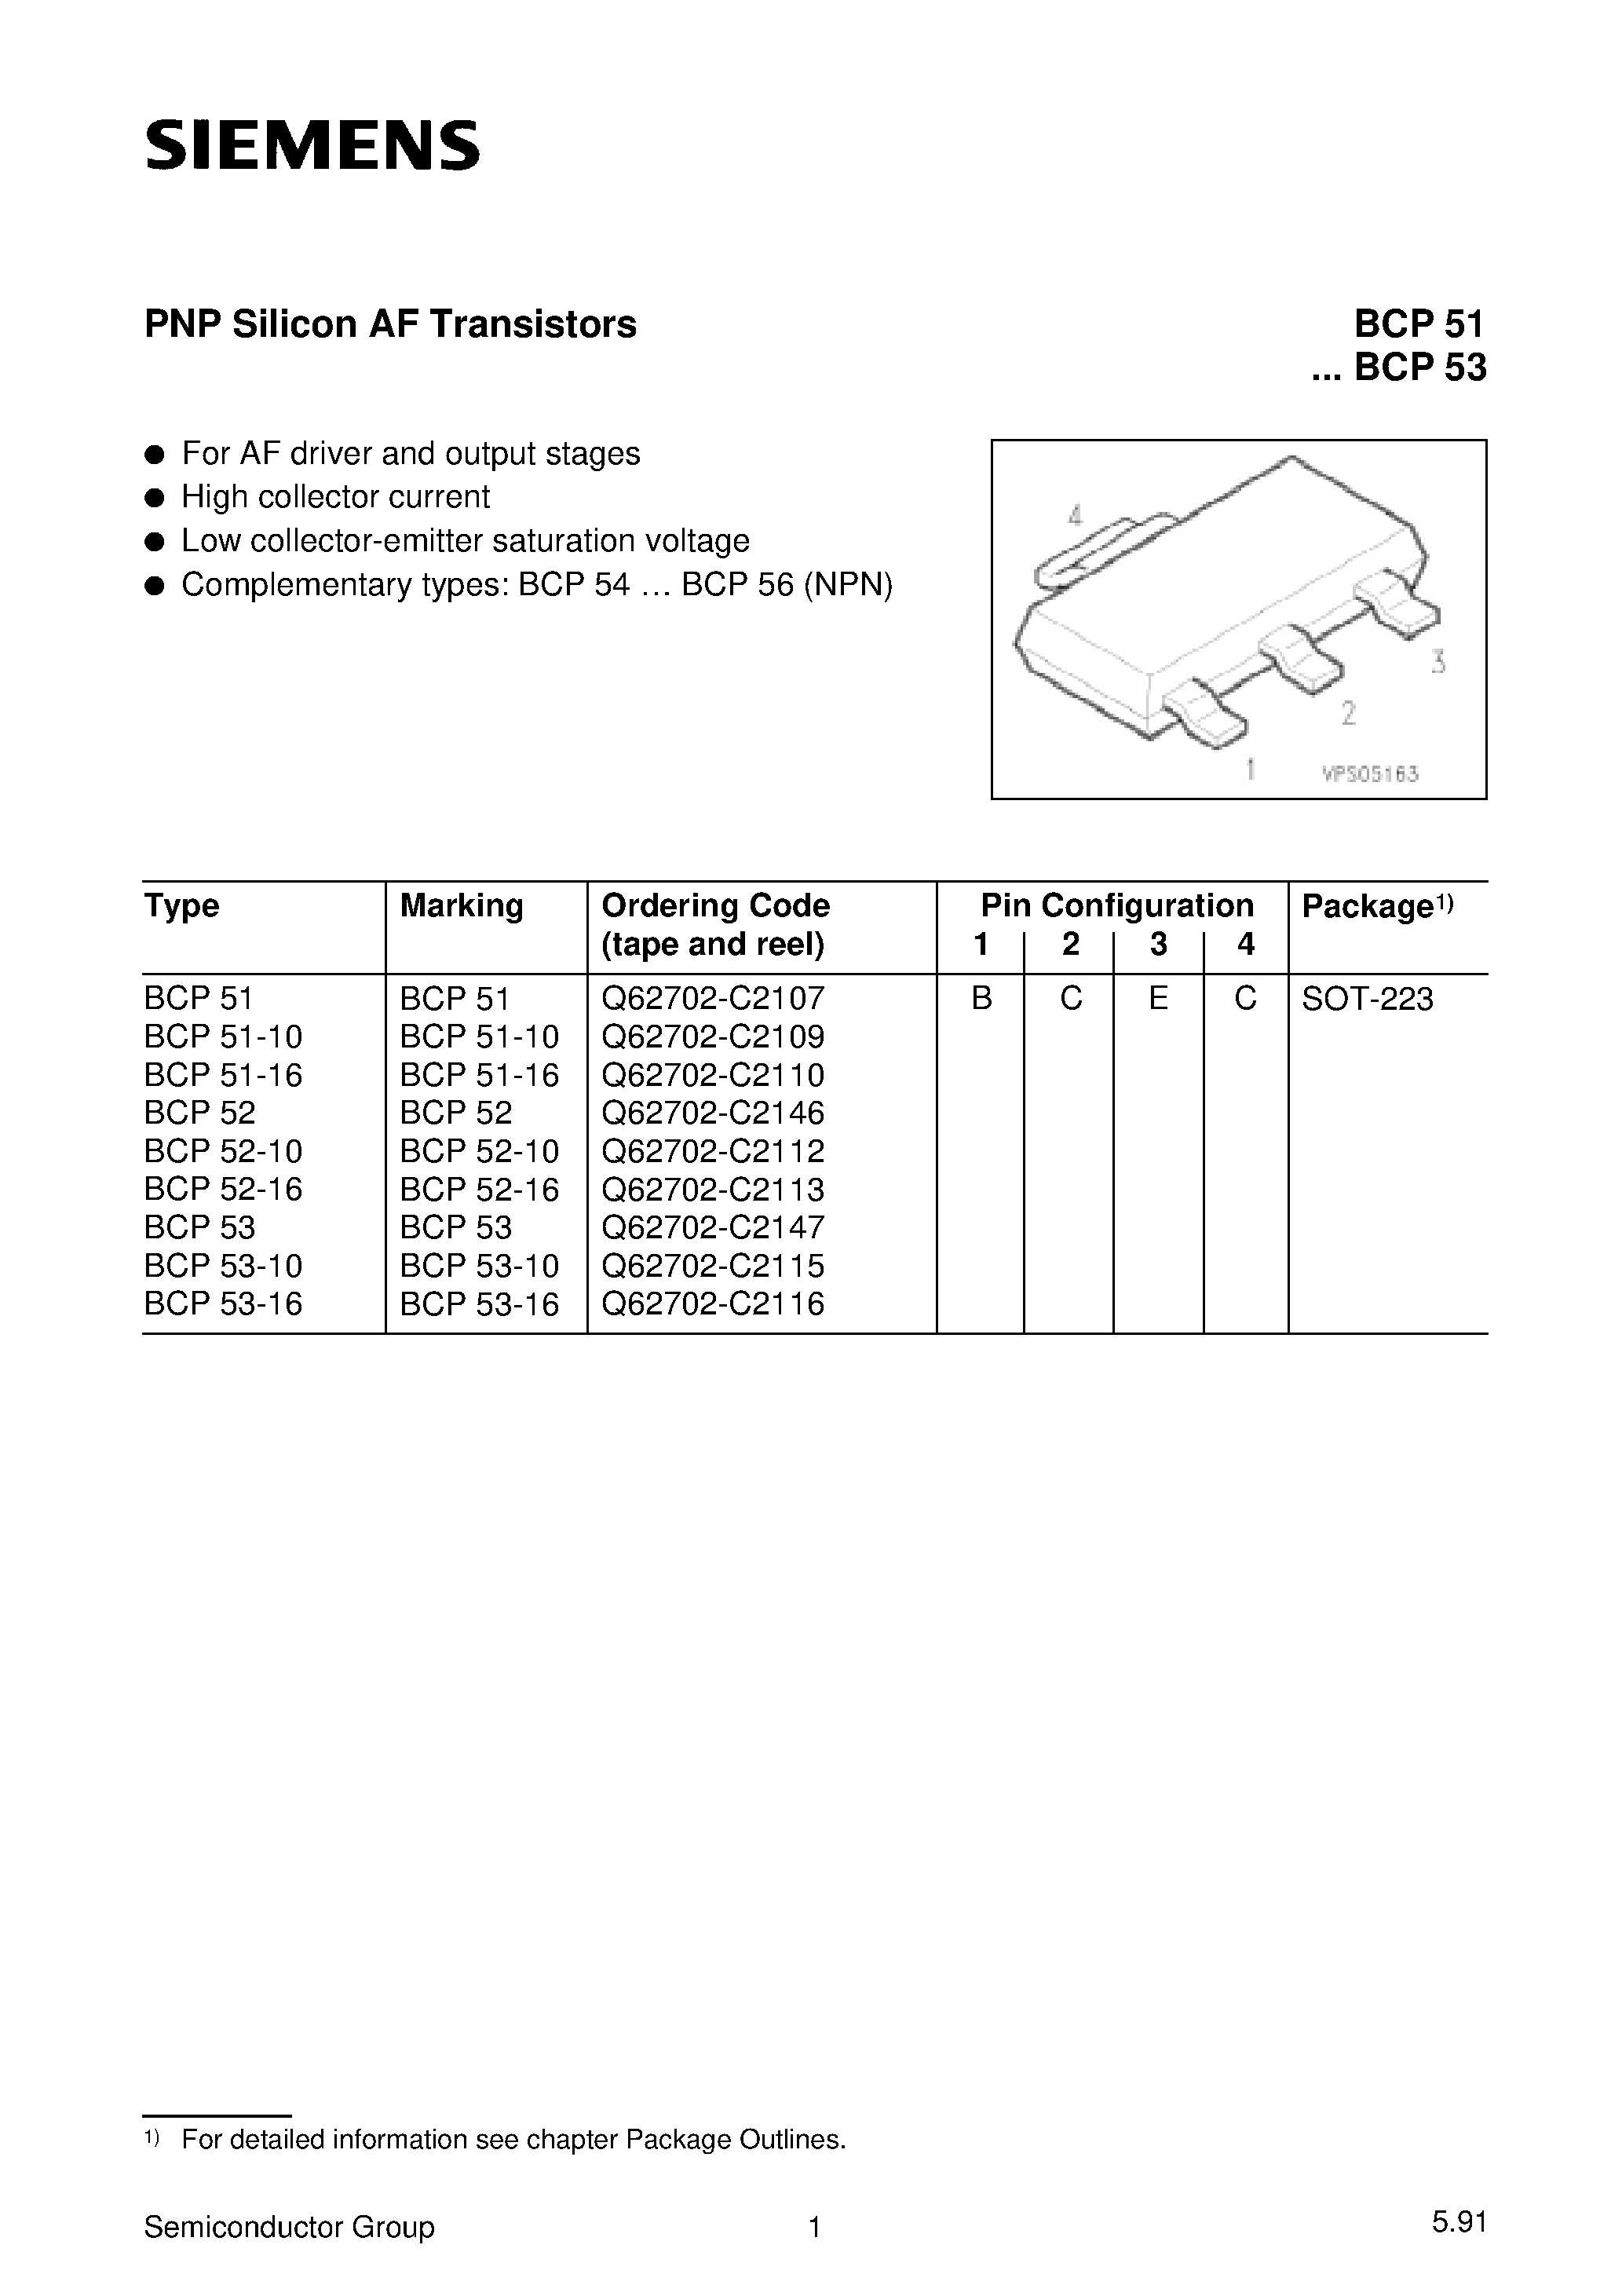 Datasheet BCP52-10 - PNP Silicon AF Transistors (For AF driver and output stages High collector current) page 1